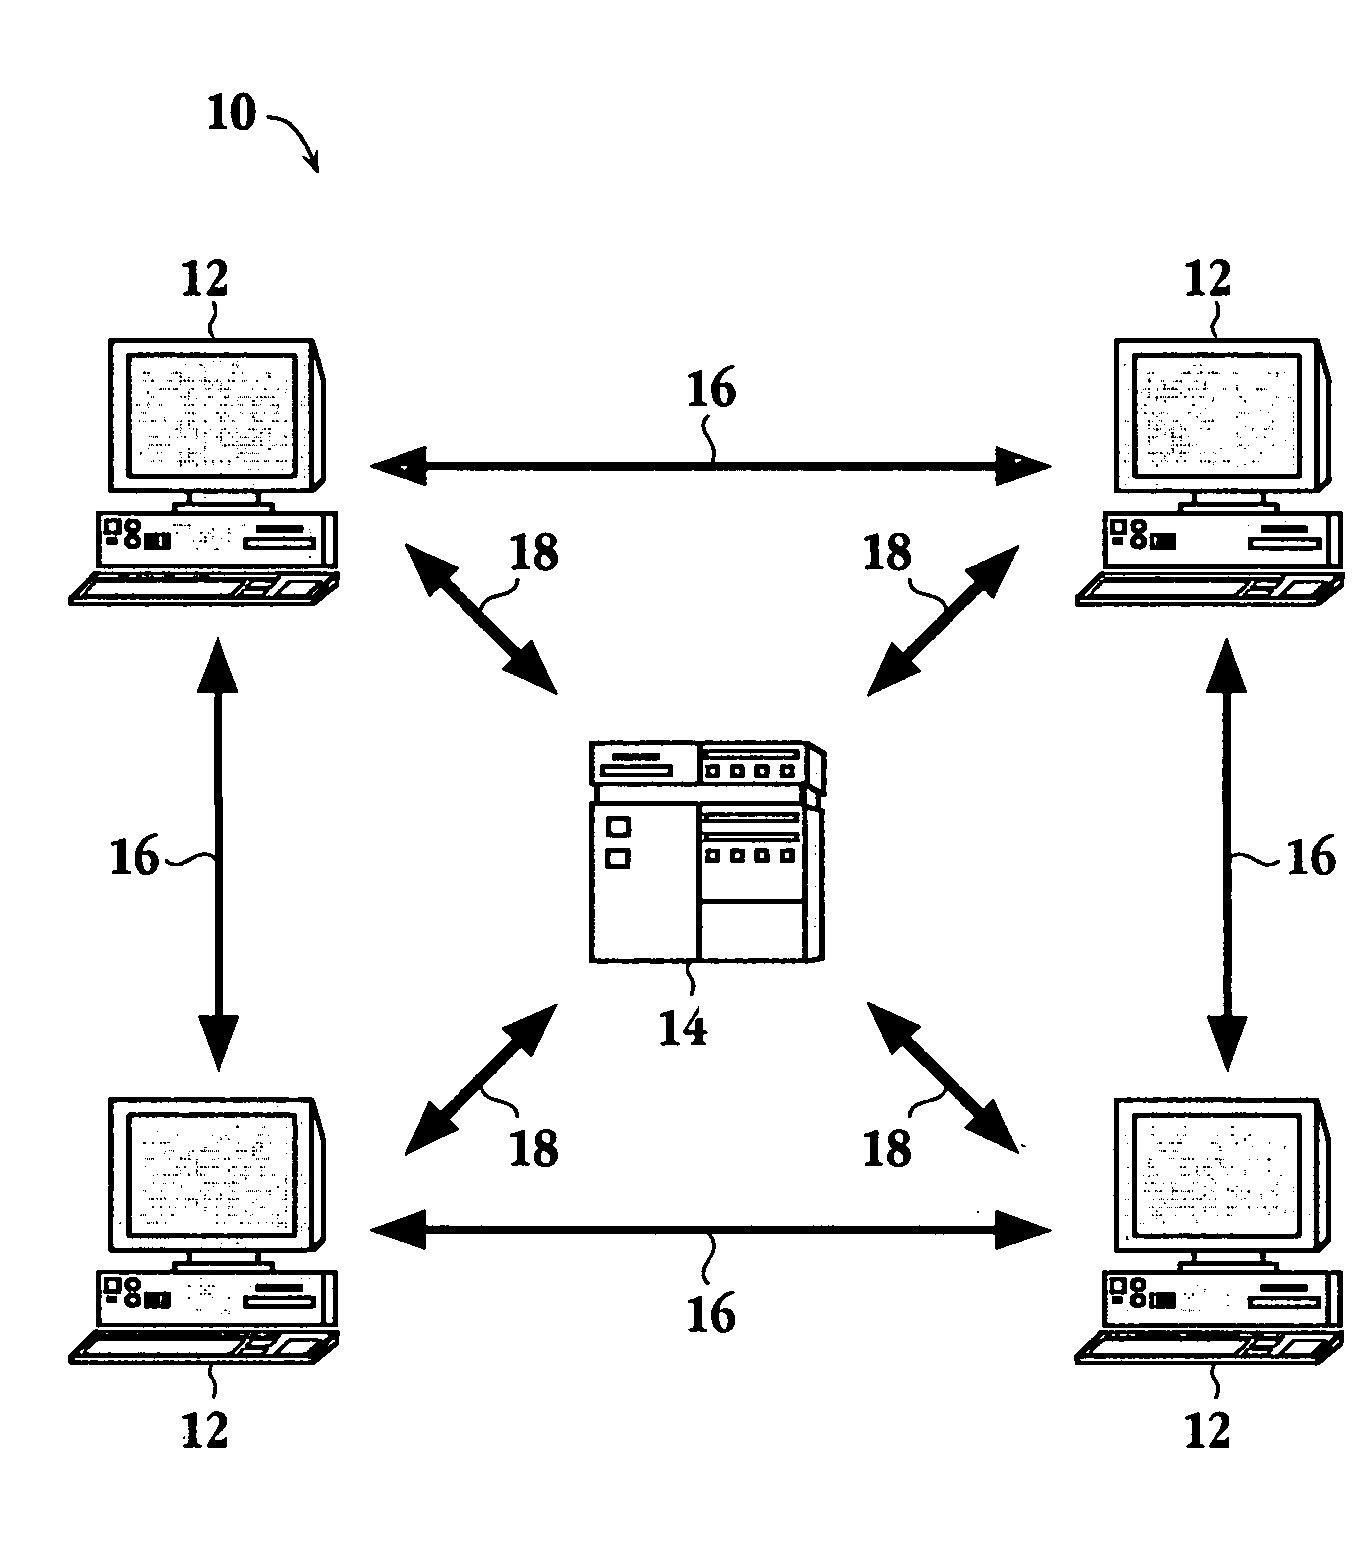 Connectionless TCP/IP data exchange